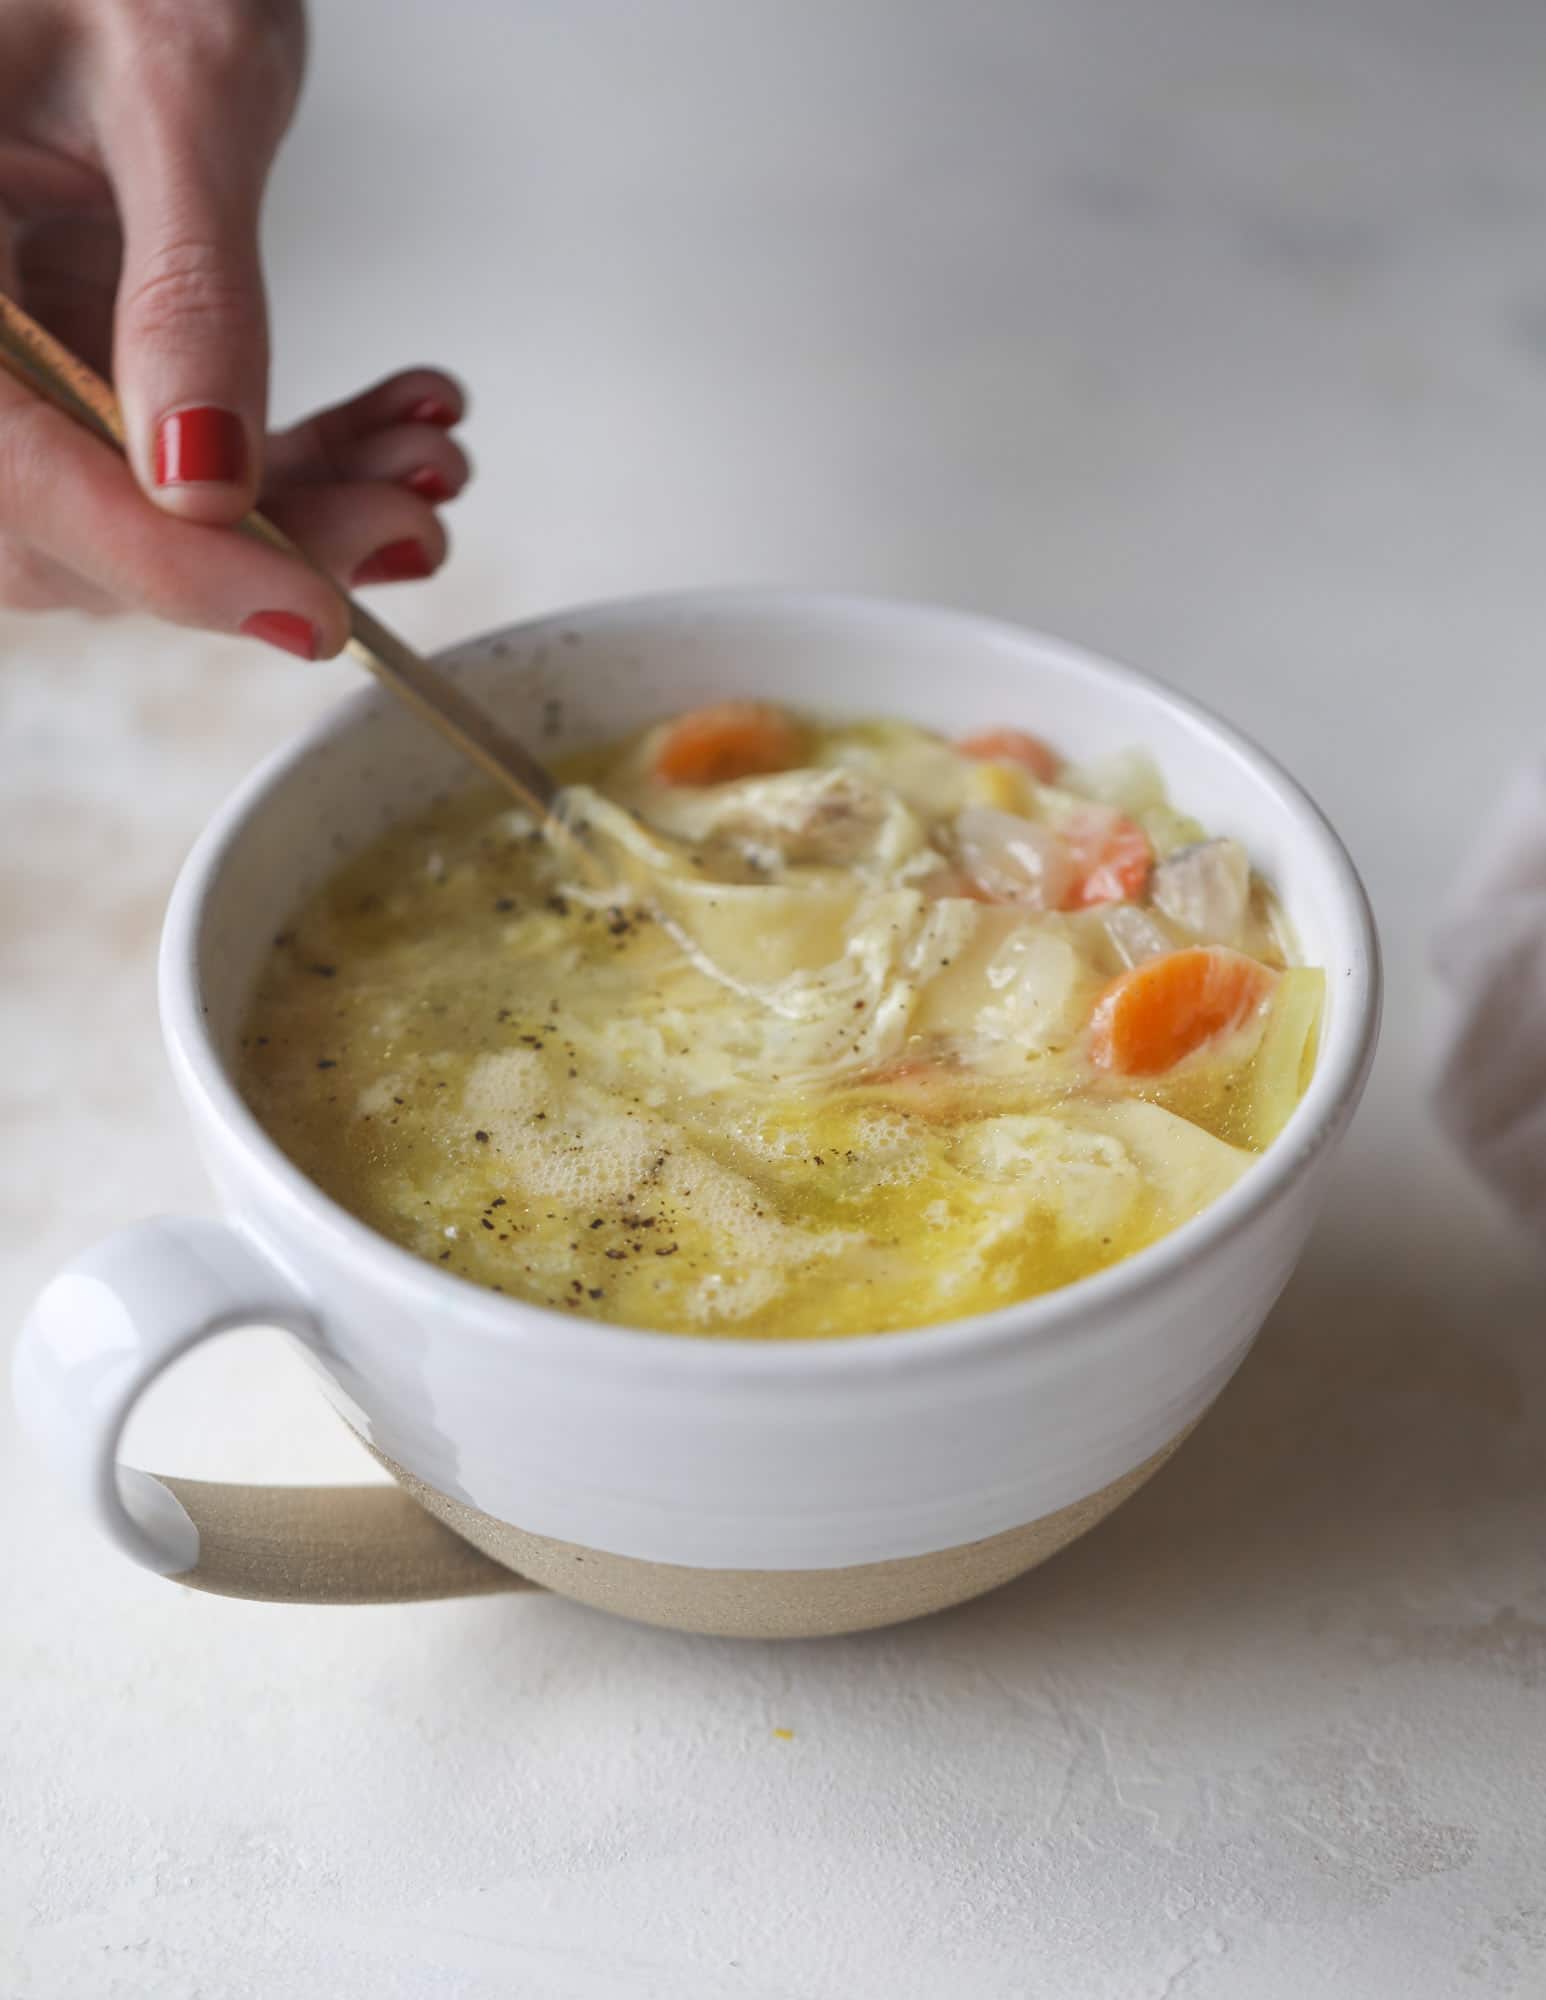 This chicken noodle egg drop soup is the ultimate comfort food! Homemade stock and satisfying ingredients provide the best nourishment and comfort! I howsweeteats.com #chicken #noodlesoup